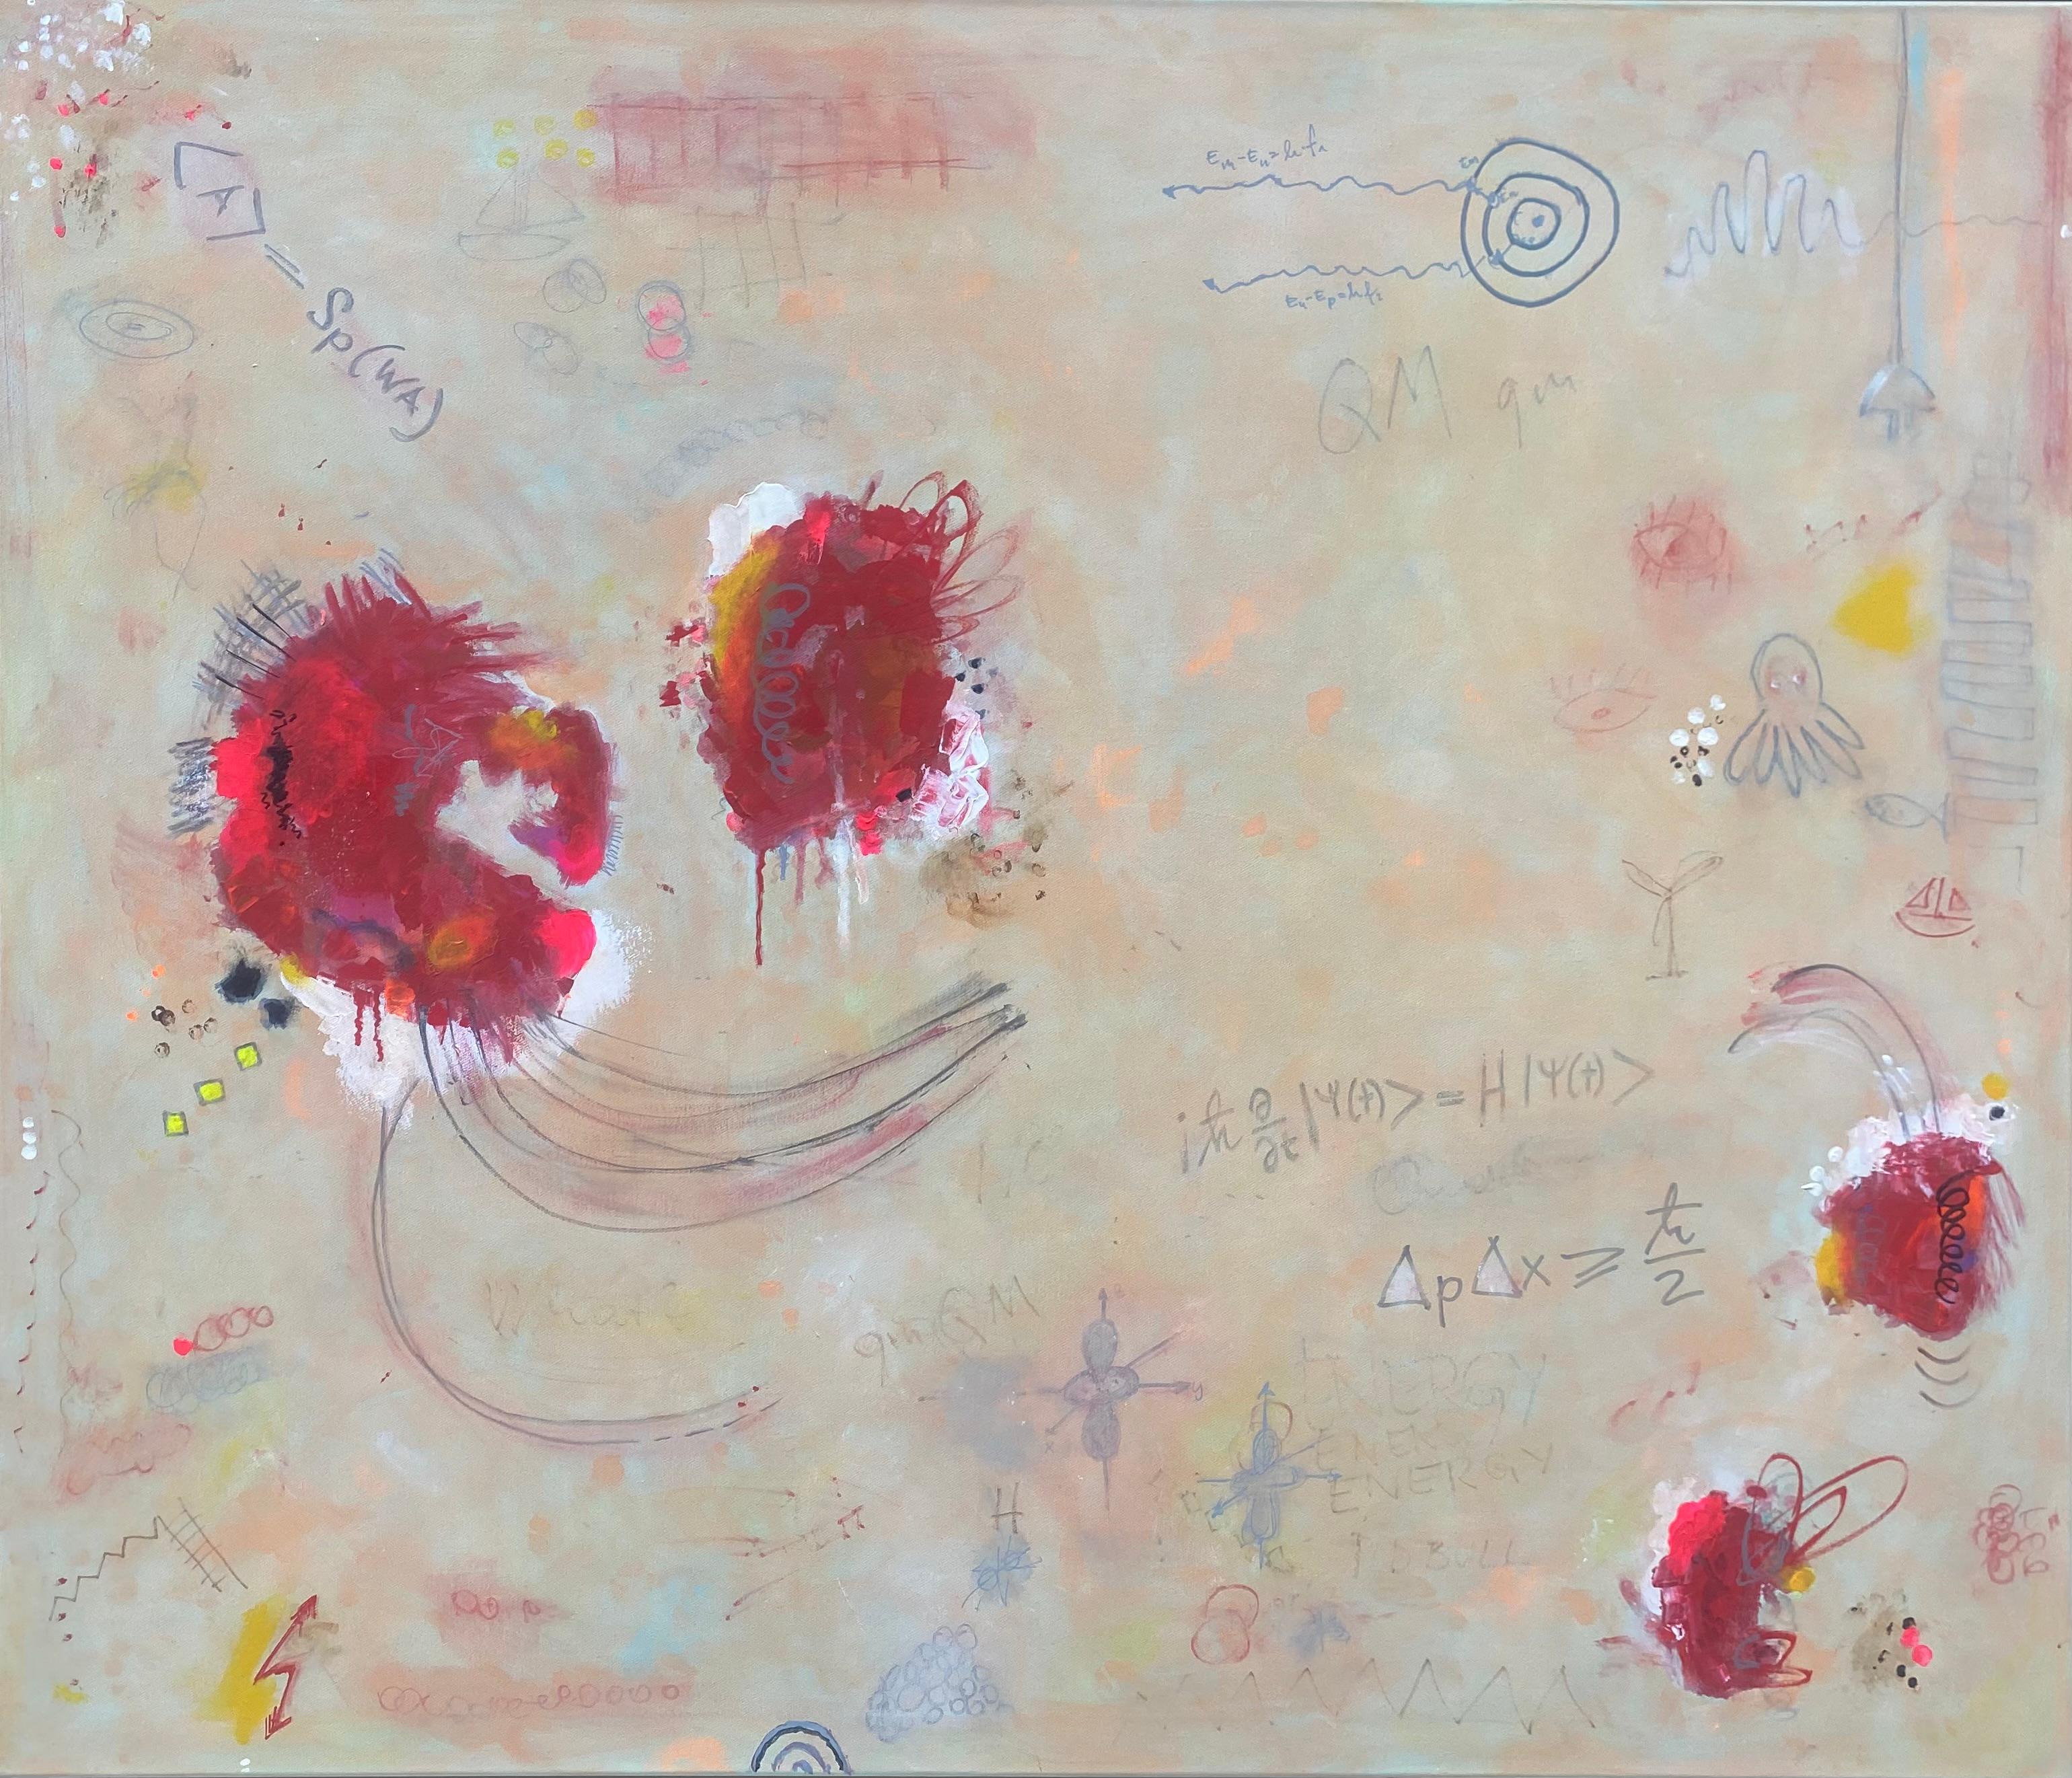 Horst Güntheroth Abstract Painting - Elementary Particle-contemporary abstract artwork, playful homage to Cy Twombly 